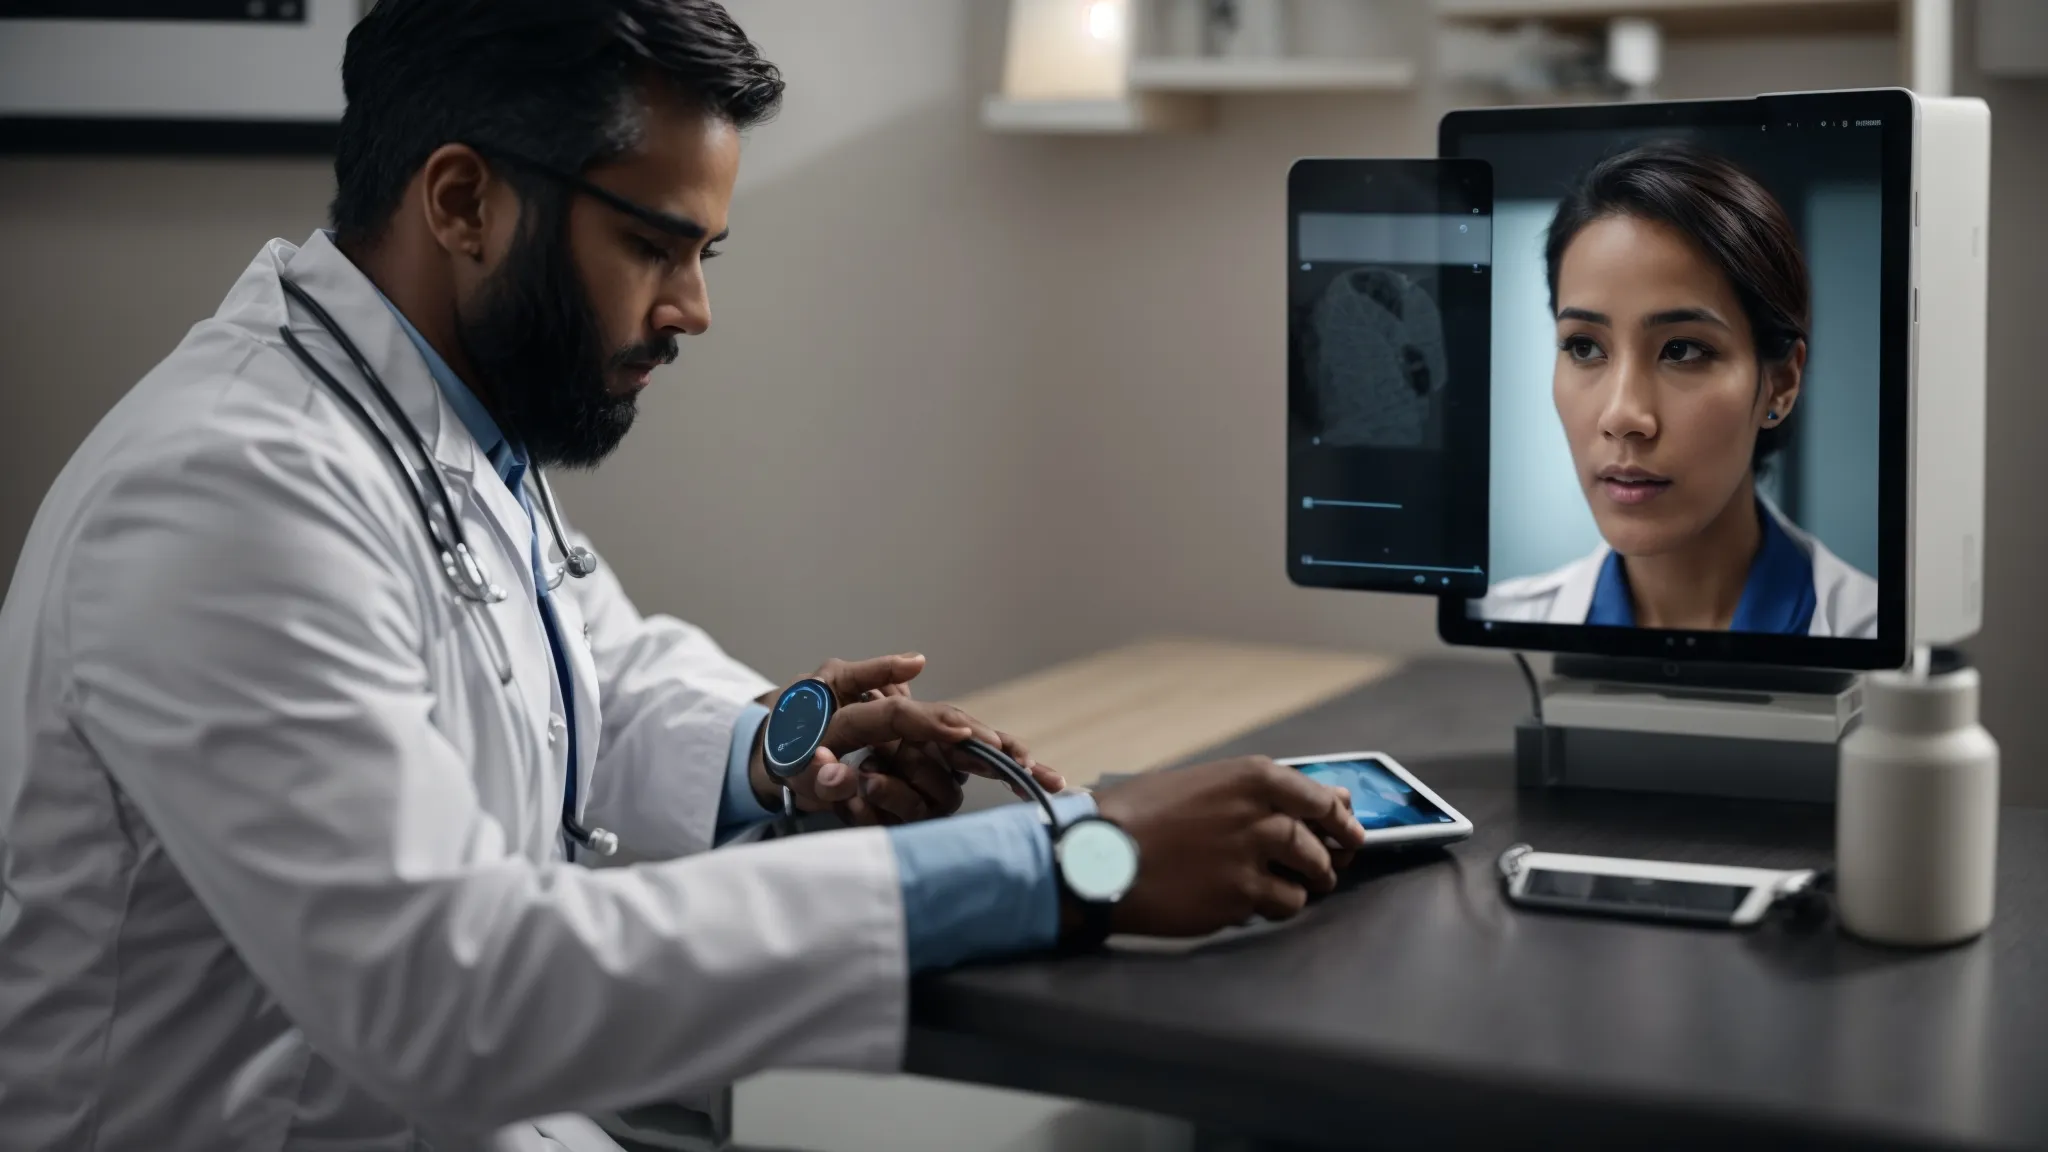 a doctor is consulting a patient over a video call on a tablet, with a wearable health monitor device visible on the patient's wrist.